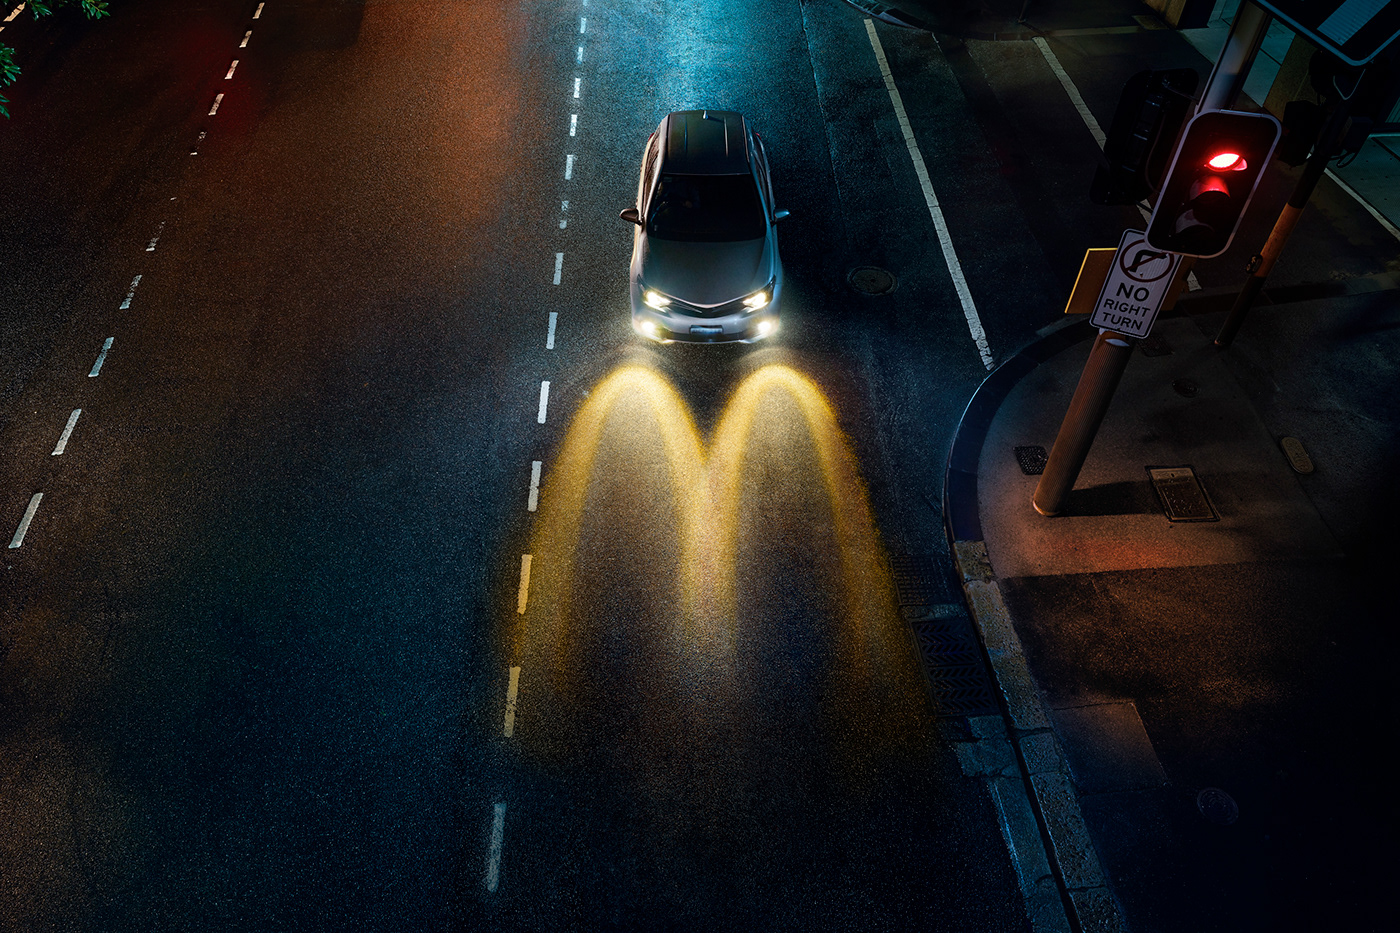 24hr Advertising  Danny Eastwood location maccas night